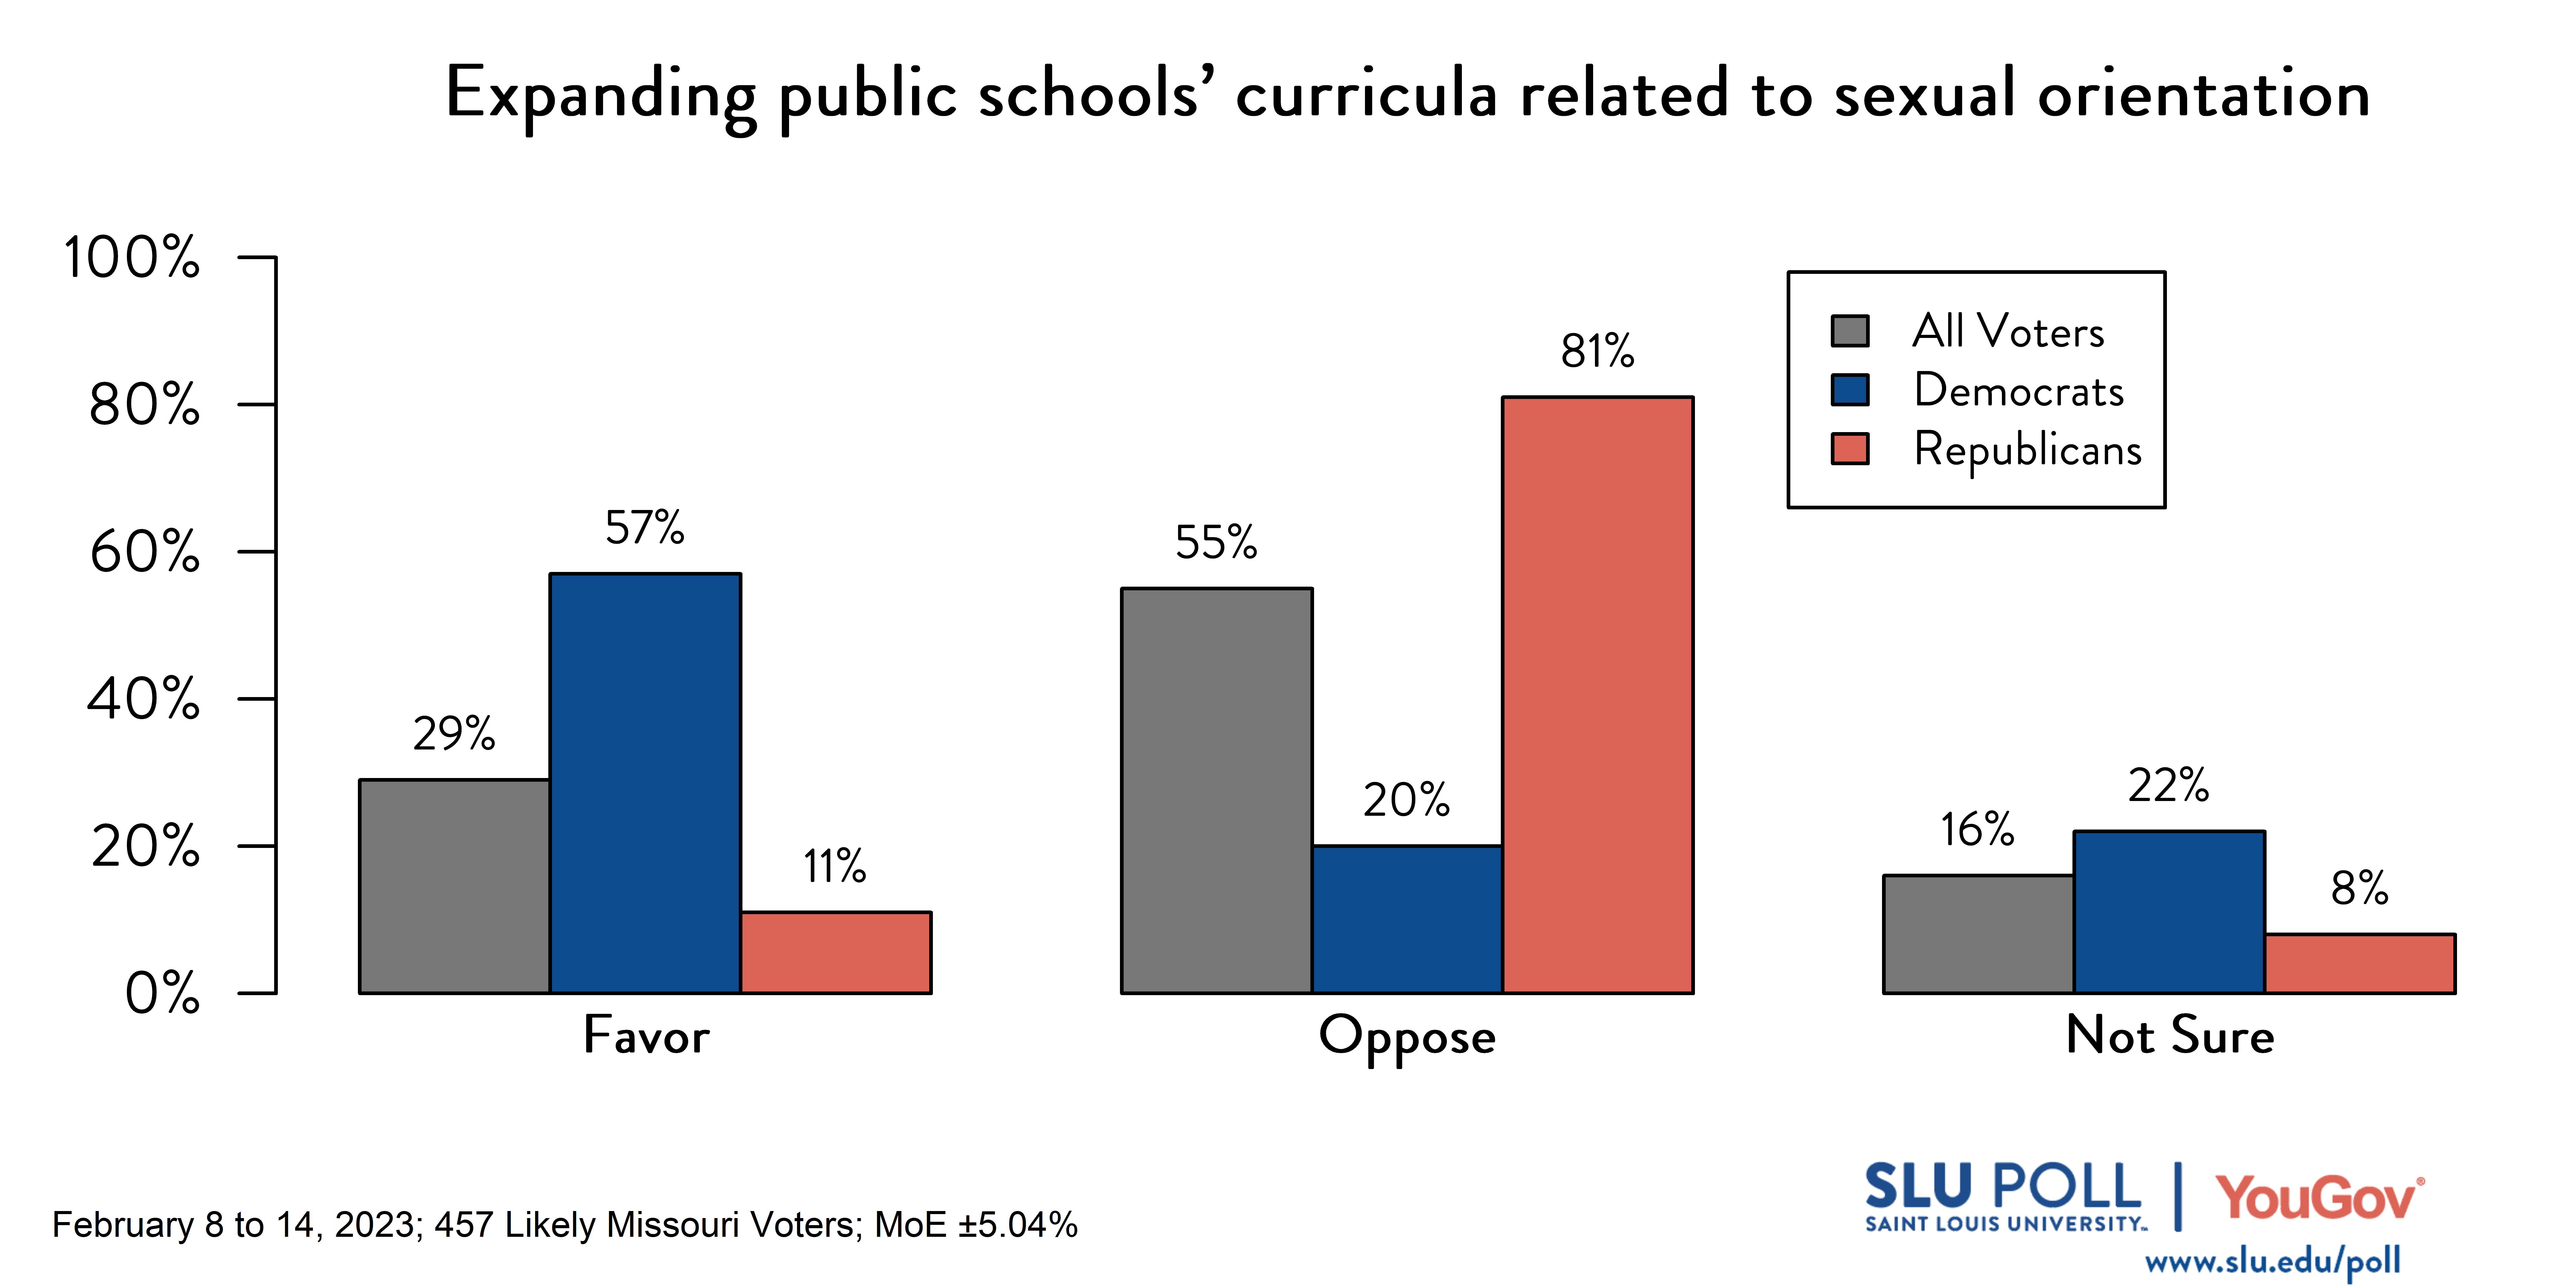 Likely voters' responses to 'Do you favor or oppose the following policies: Expanding public schools' curricula related to sexual orientation?': 29% Favor, 55% Oppose, and 16% Not sure. Democratic voters' responses: ' 57% Favor, 20% Oppose, and 22% Not sure. Republican voters' responses: 11% Favor, 81% Oppose, and 8% Not sure.